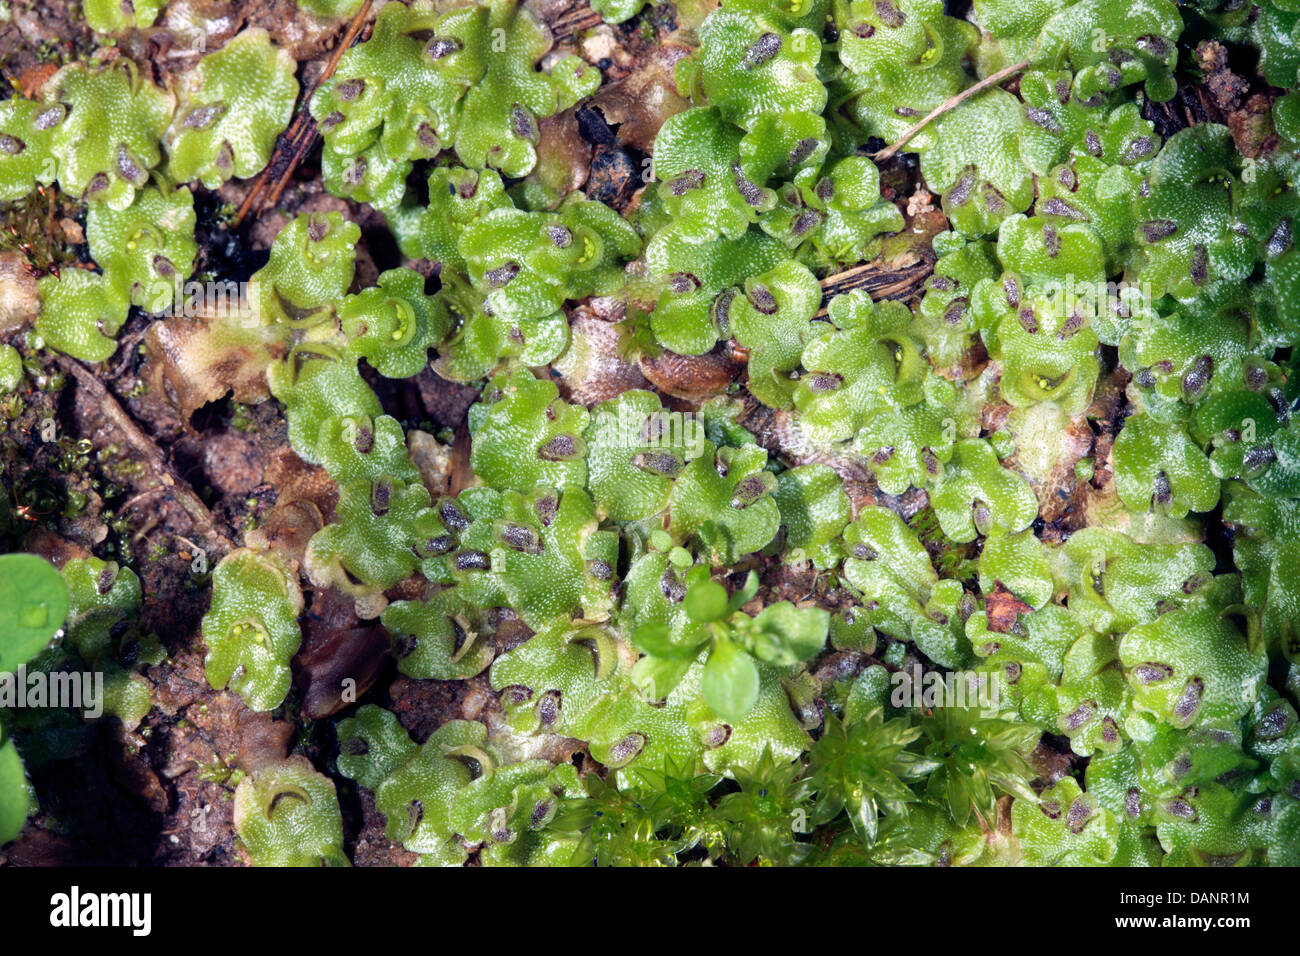 Close-up of  the Thallose Liverwort Lunularia cruciata with Gemmae in Cups Stock Photo